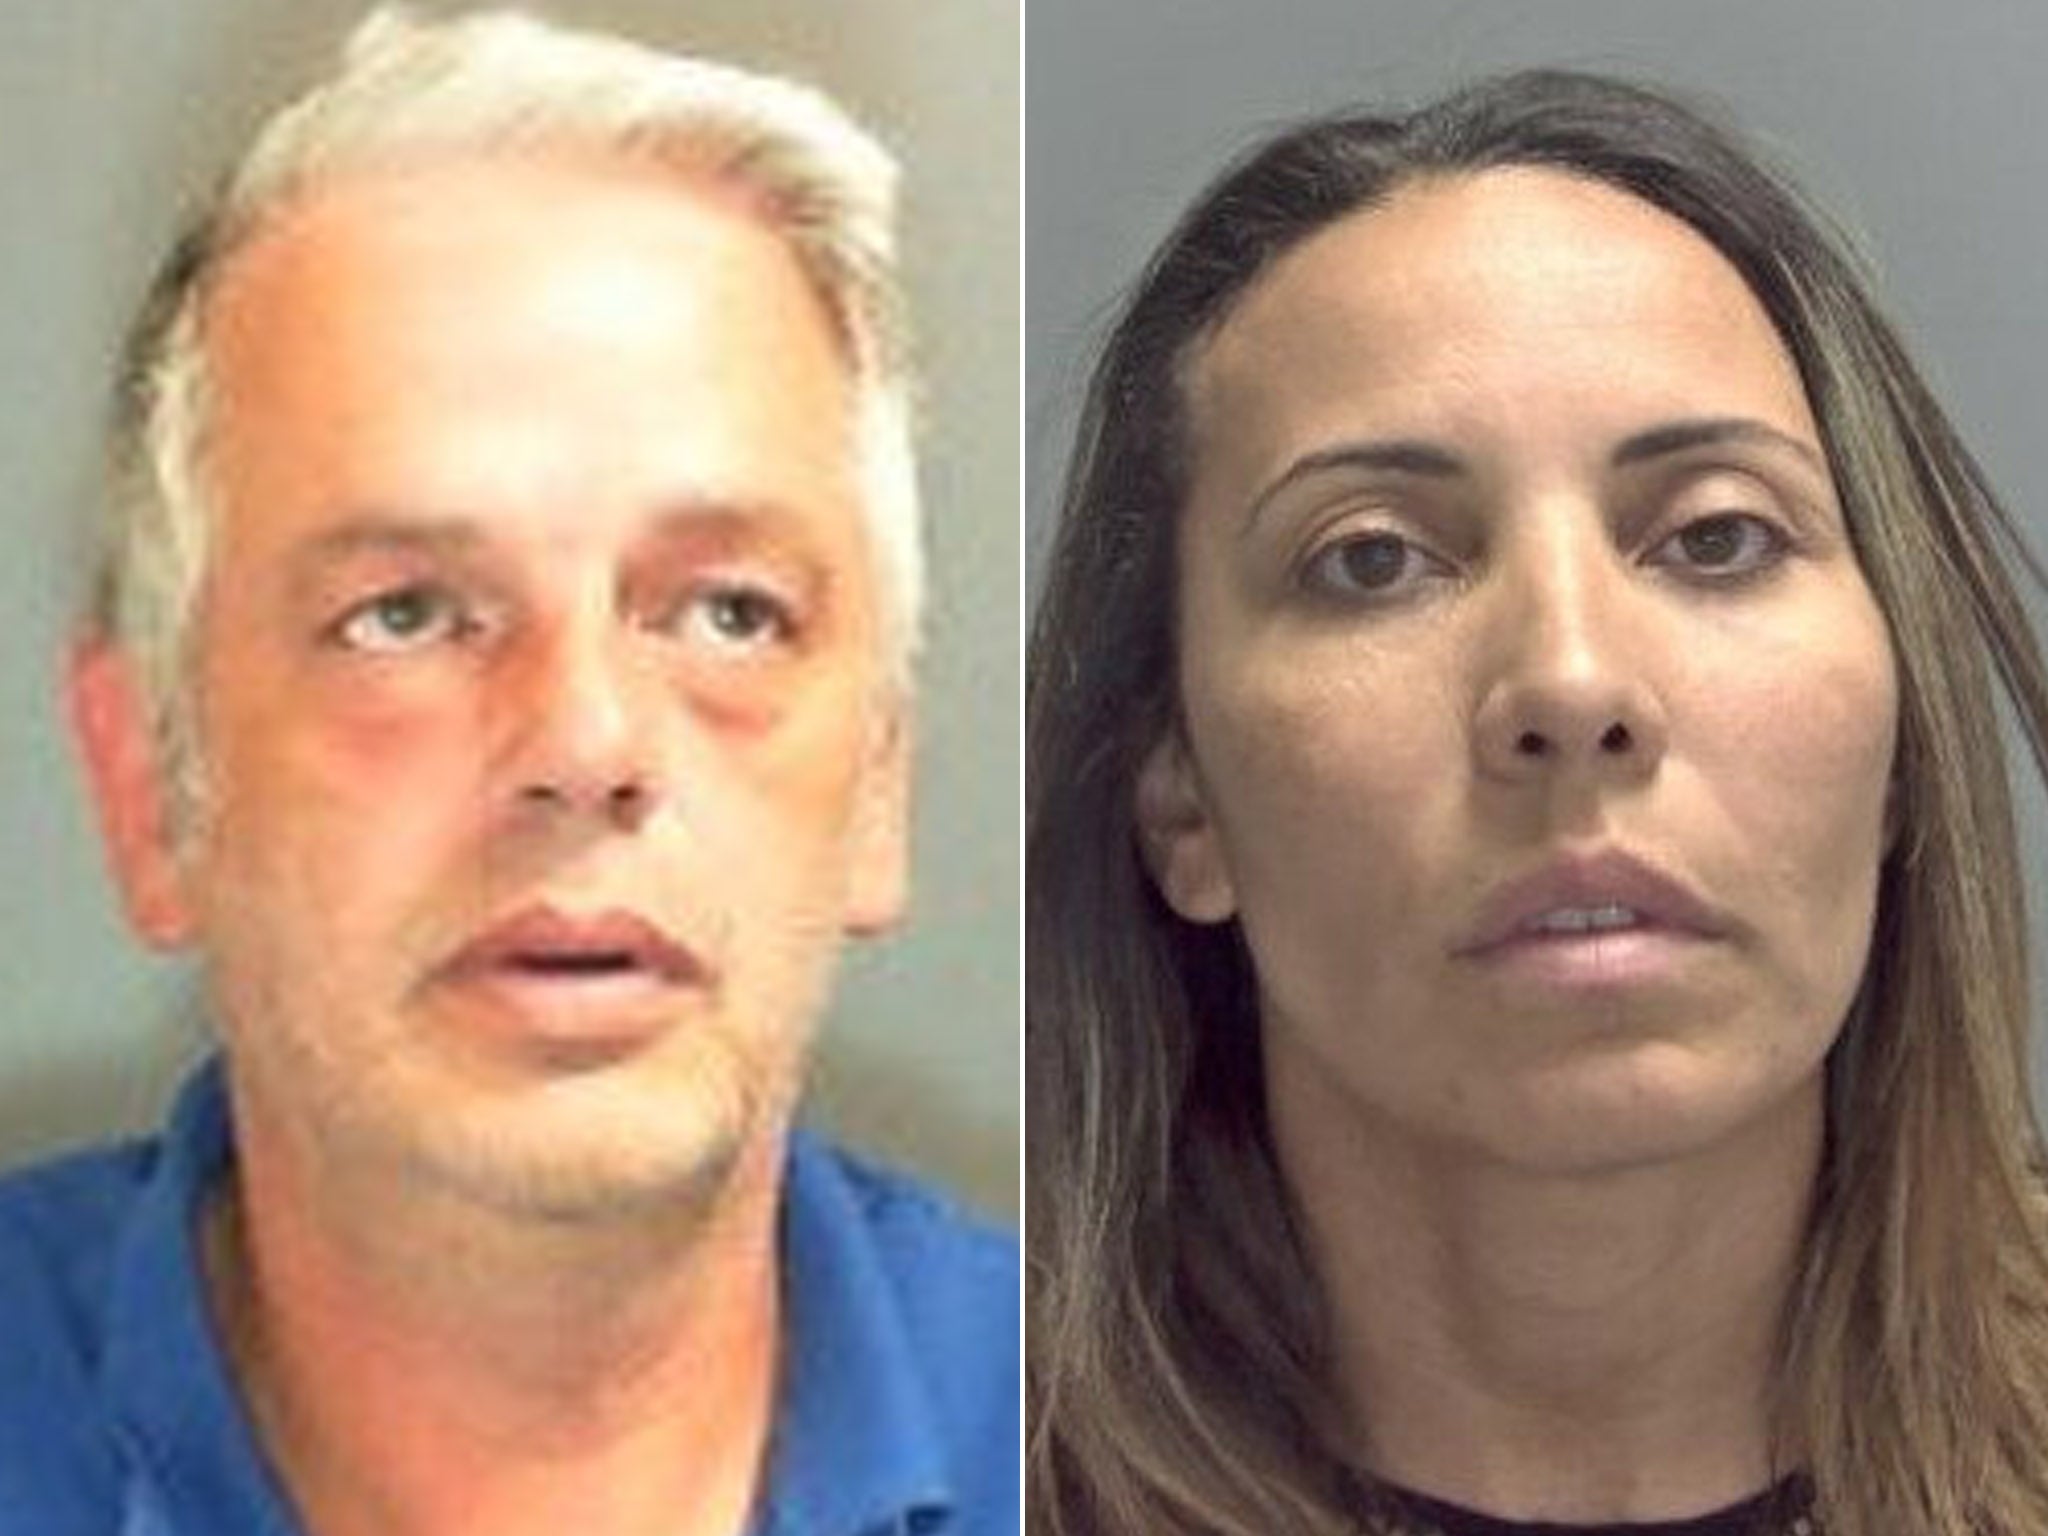 Husband and wife who ran brothel jailed for sex trafficking The Independent